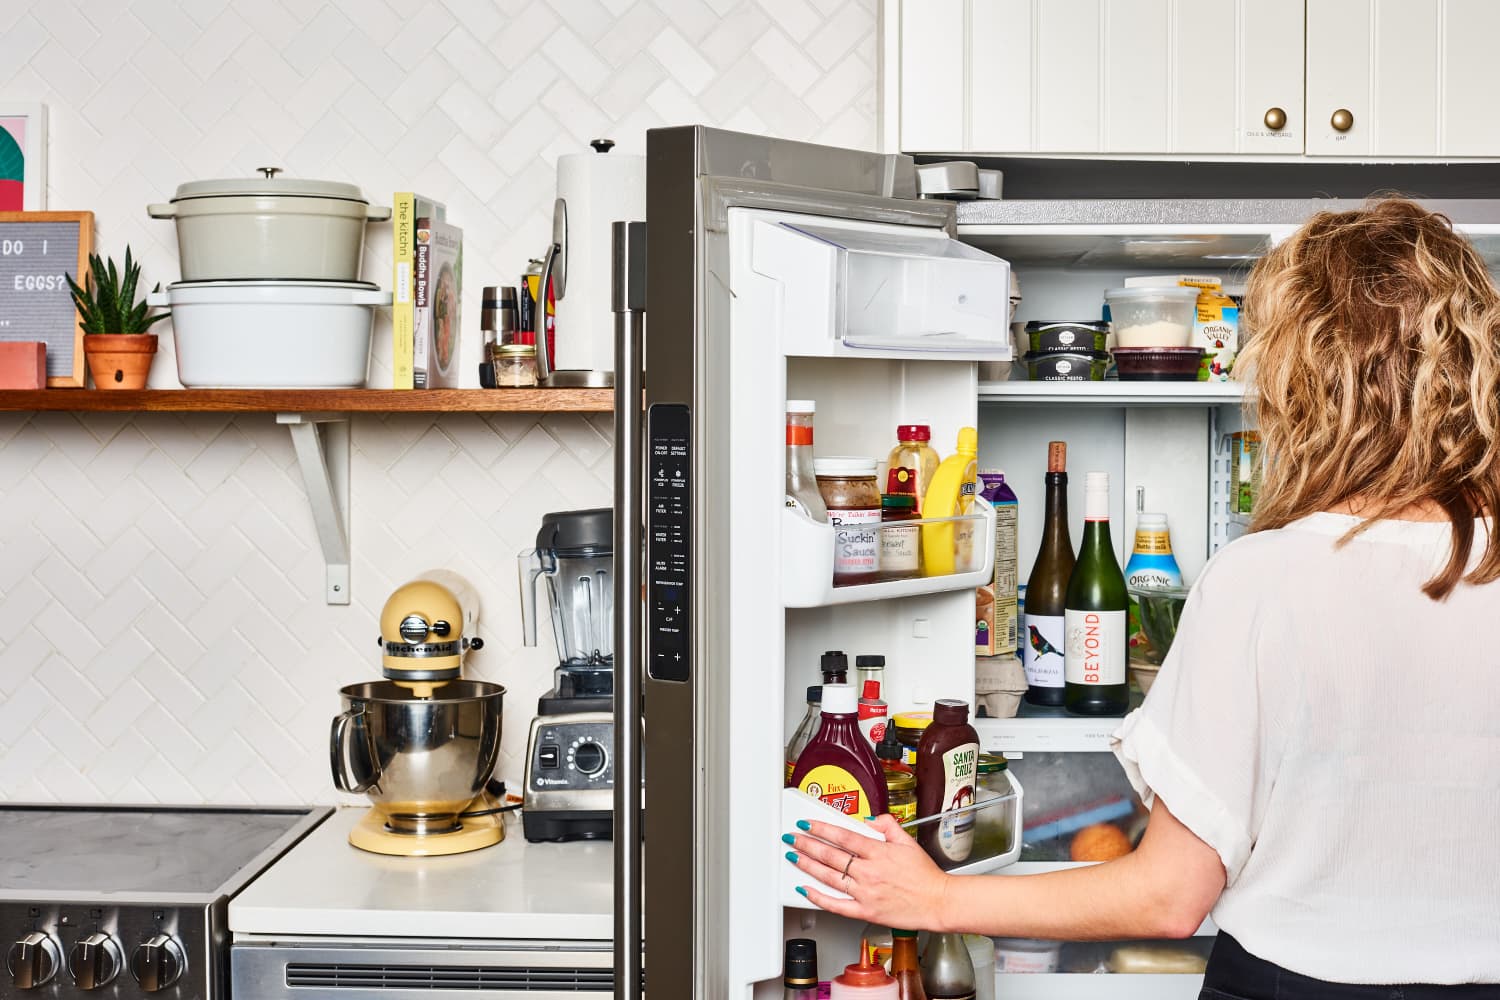 This Seemingly Counterintuitive Food Storage Trick Actually Makes More Room in My Fridge